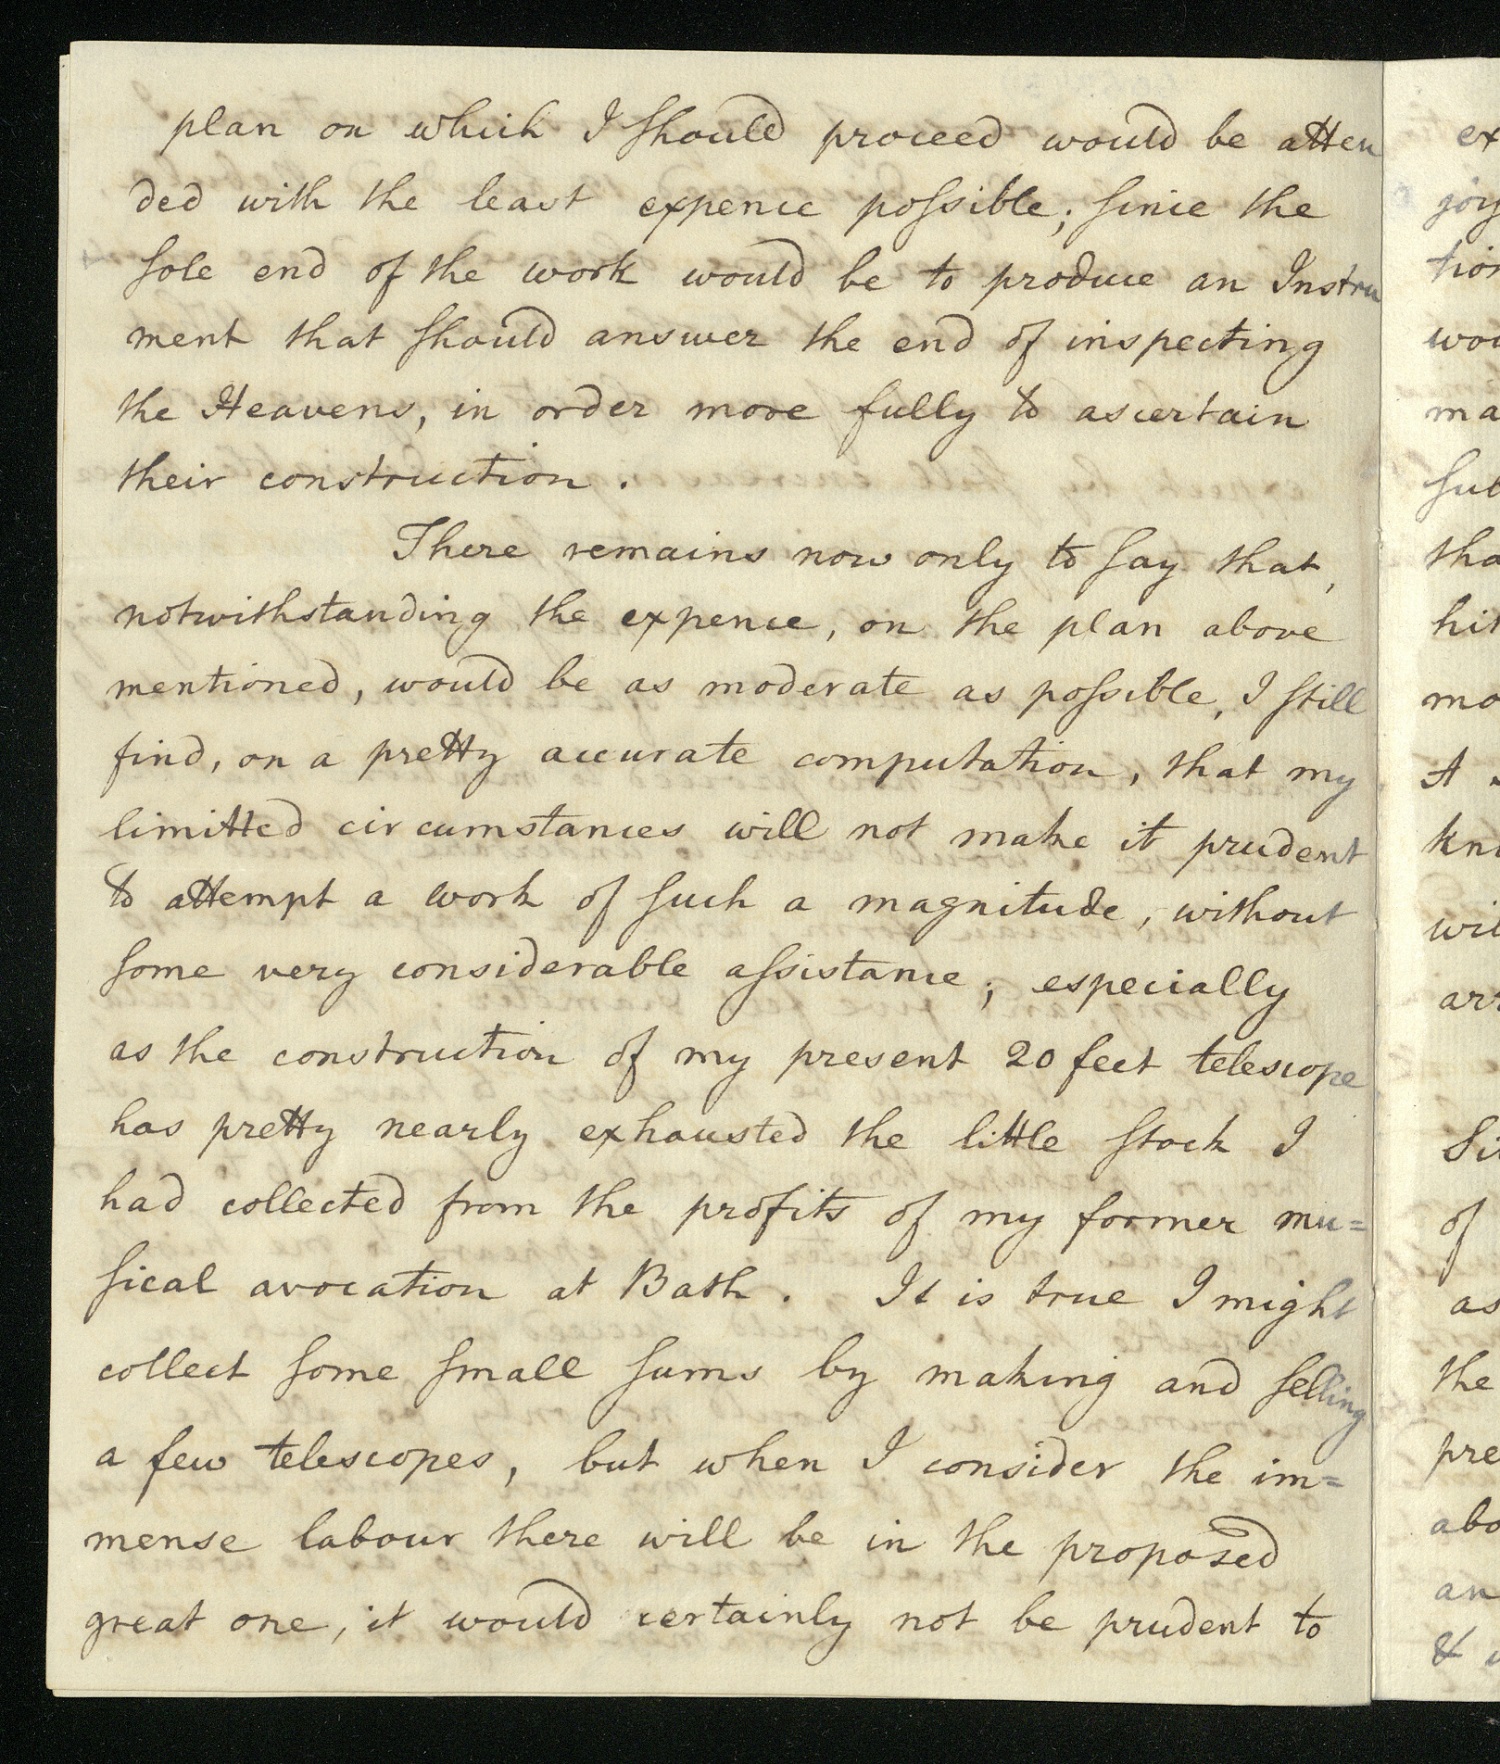 Letter from William Herschel to Sir Joseph Banks, with an estimate of the expenses required to build an enlarged telescope, page 6